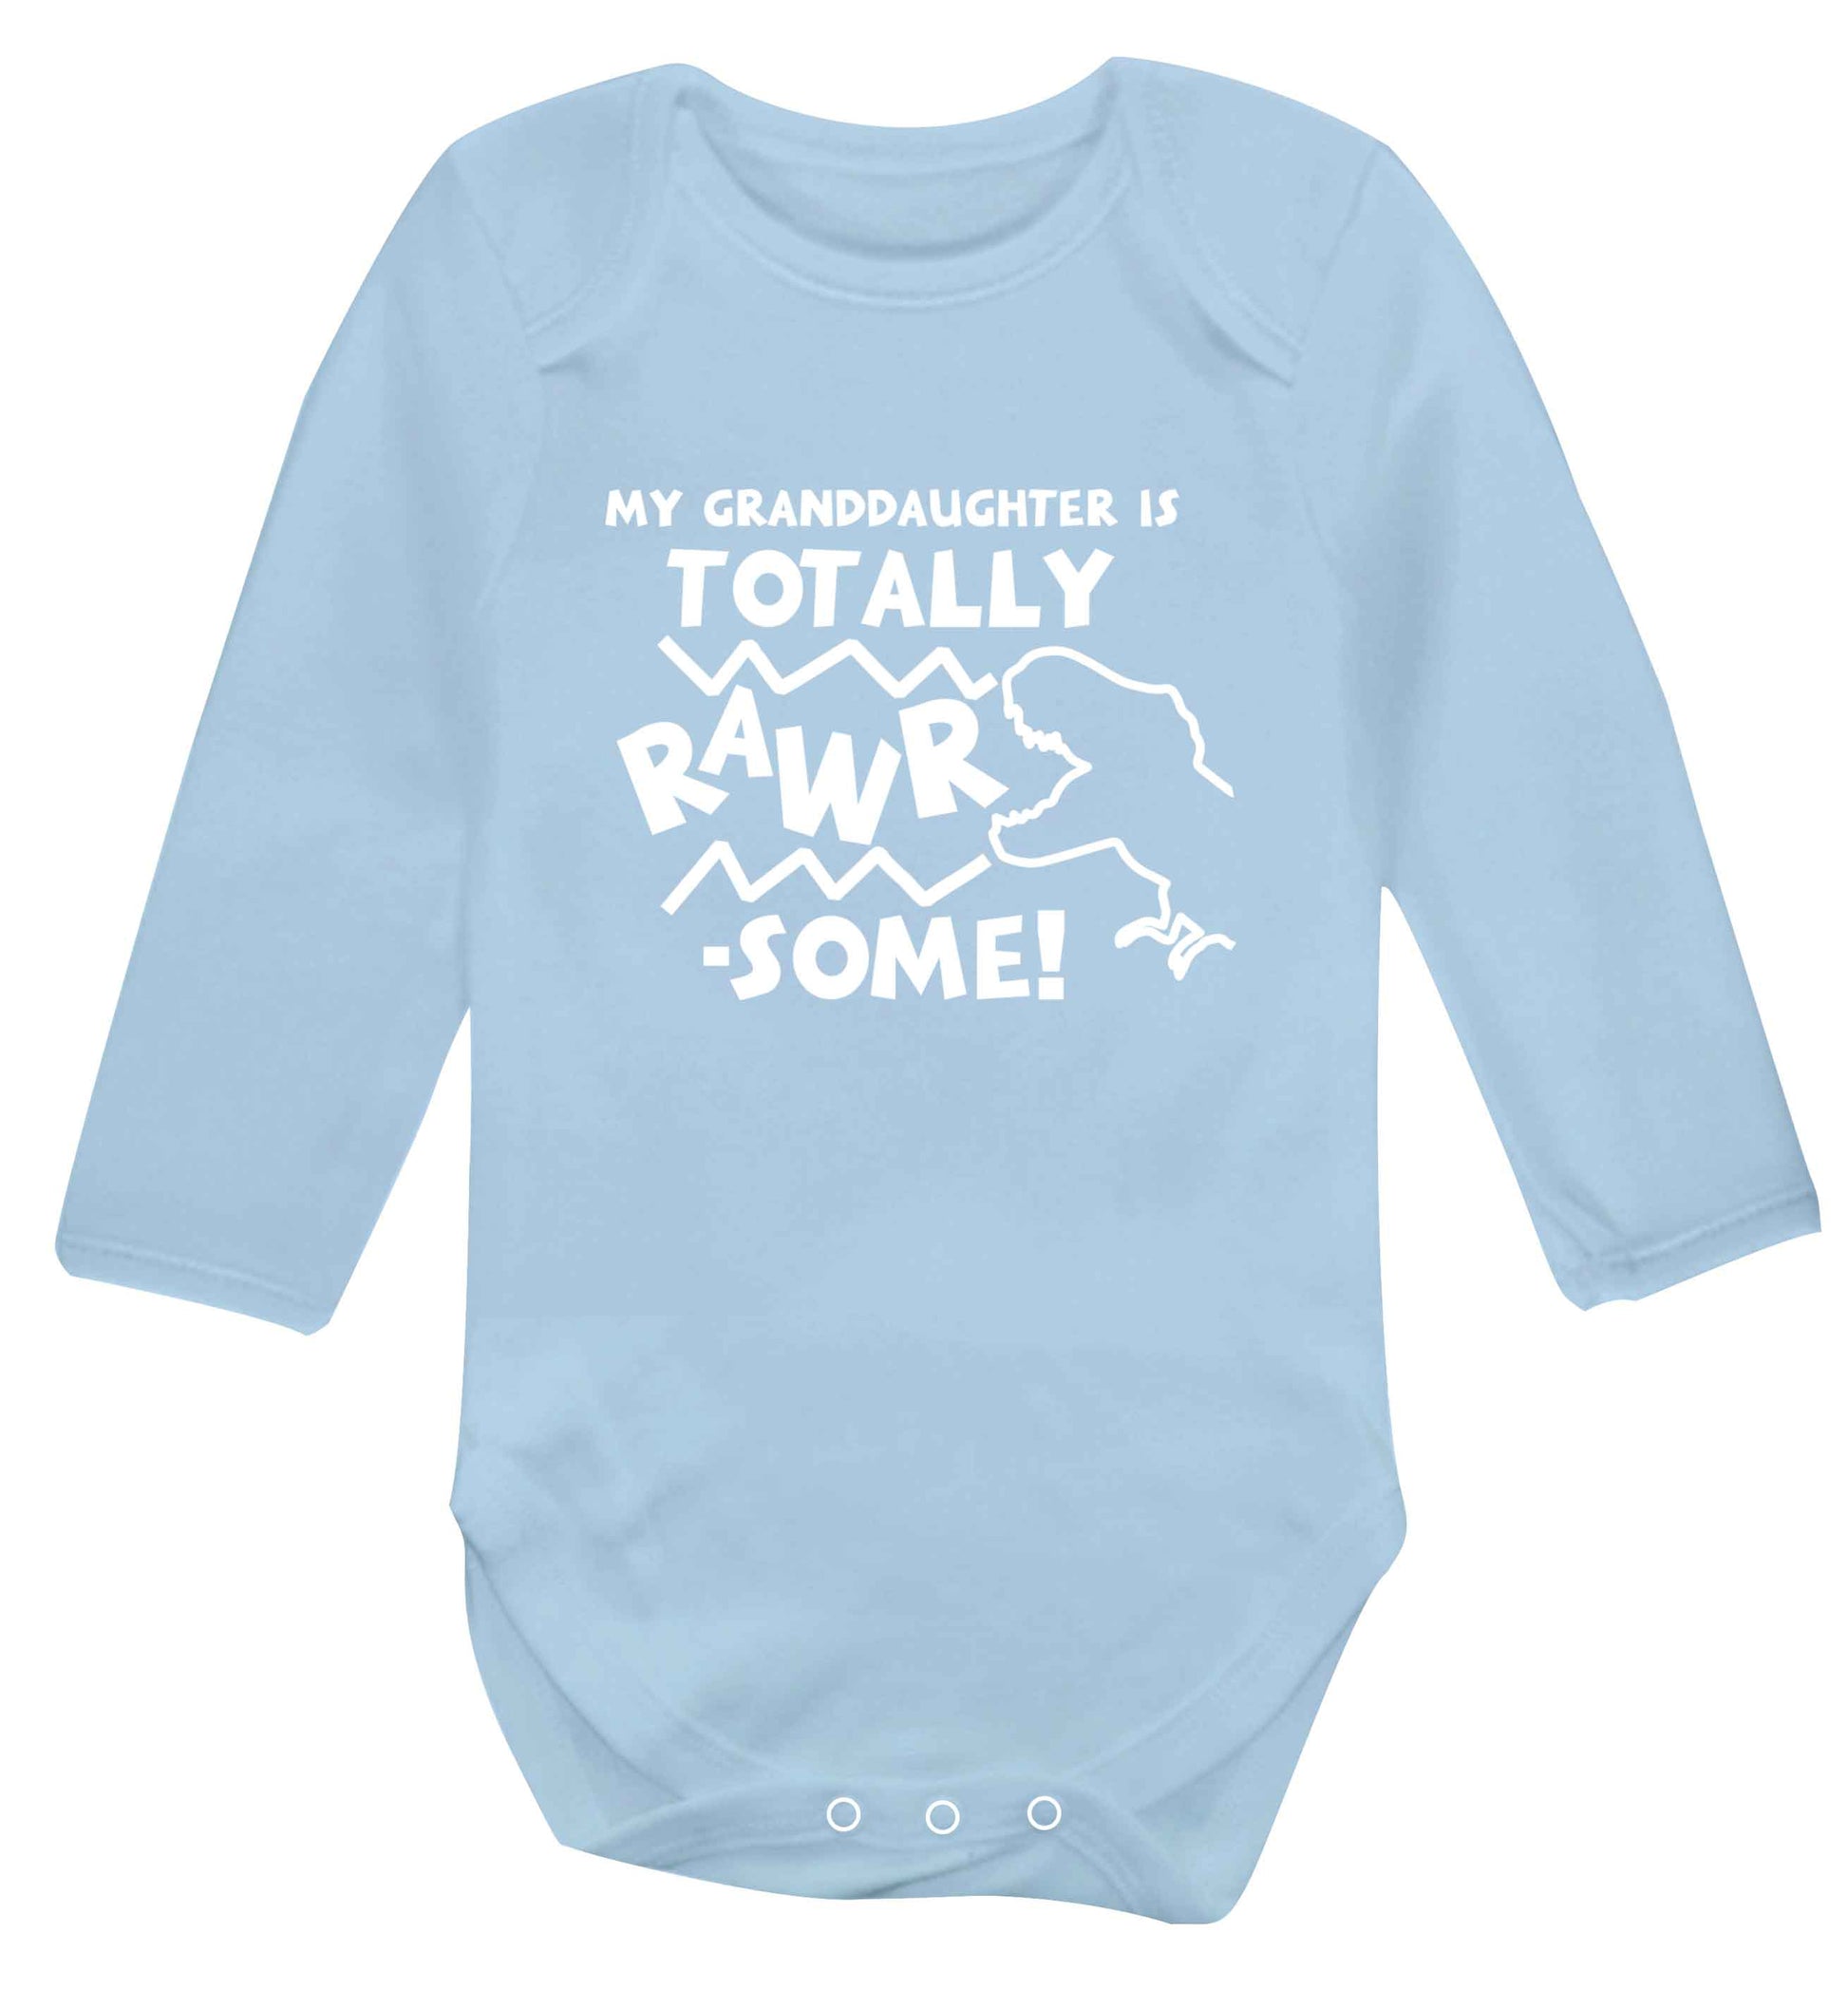 My granddaughter is totally rawrsome baby vest long sleeved pale blue 6-12 months